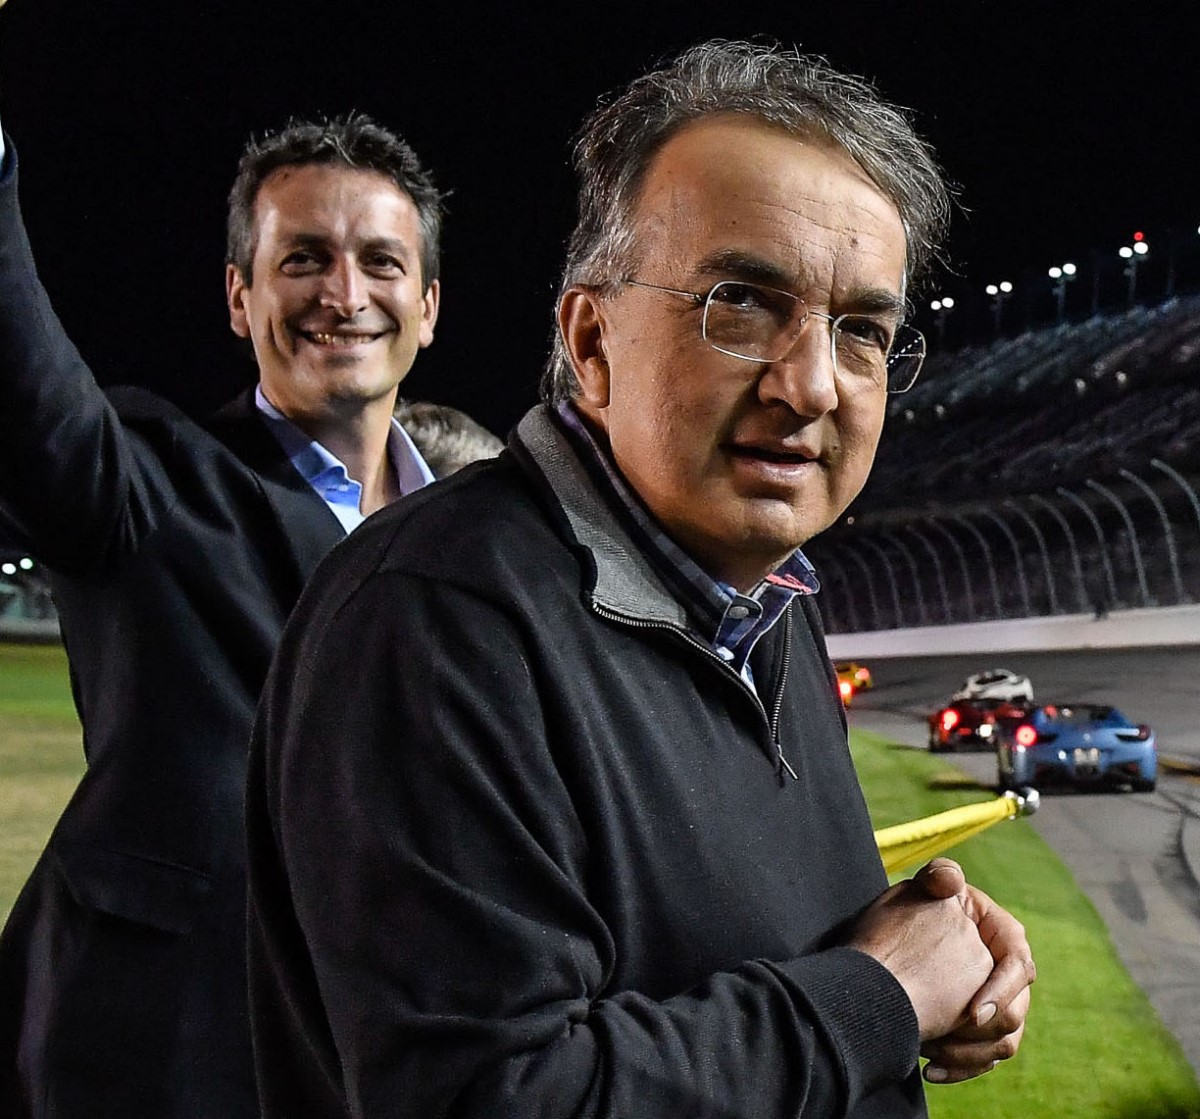 Has Marchionne bought into F1?